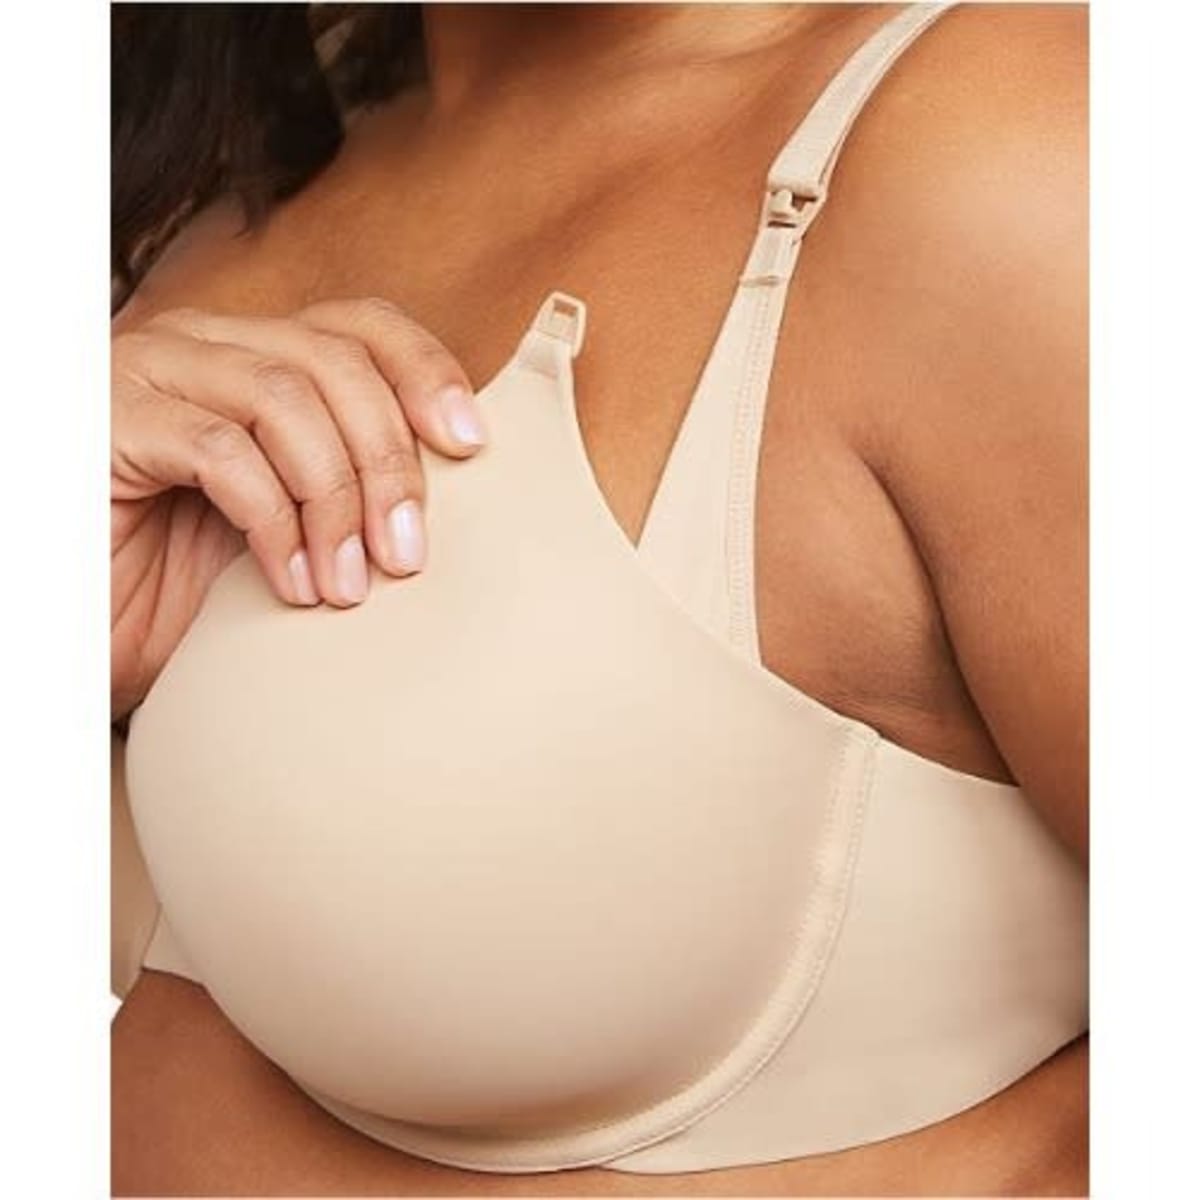 Full Coverage Support Bra Large Cup B C Dd E Minimizer Bras, 57% OFF